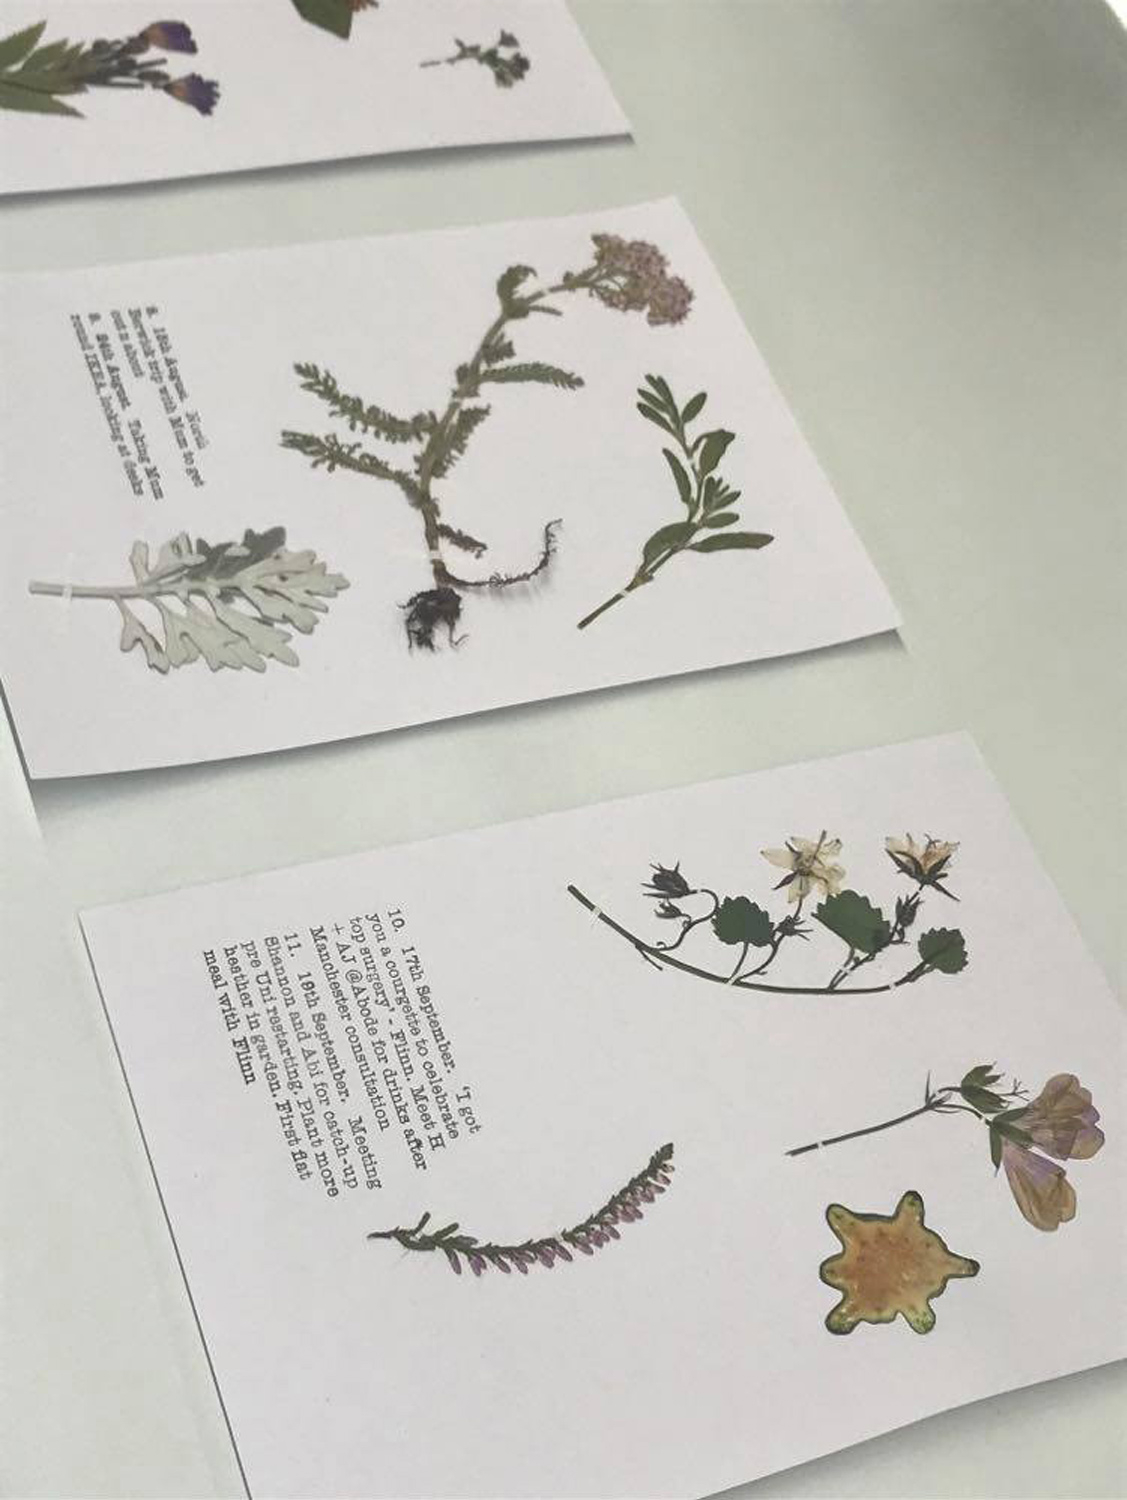 A snapshot of personal diary entries in letterpress with pressed flora mementos. 